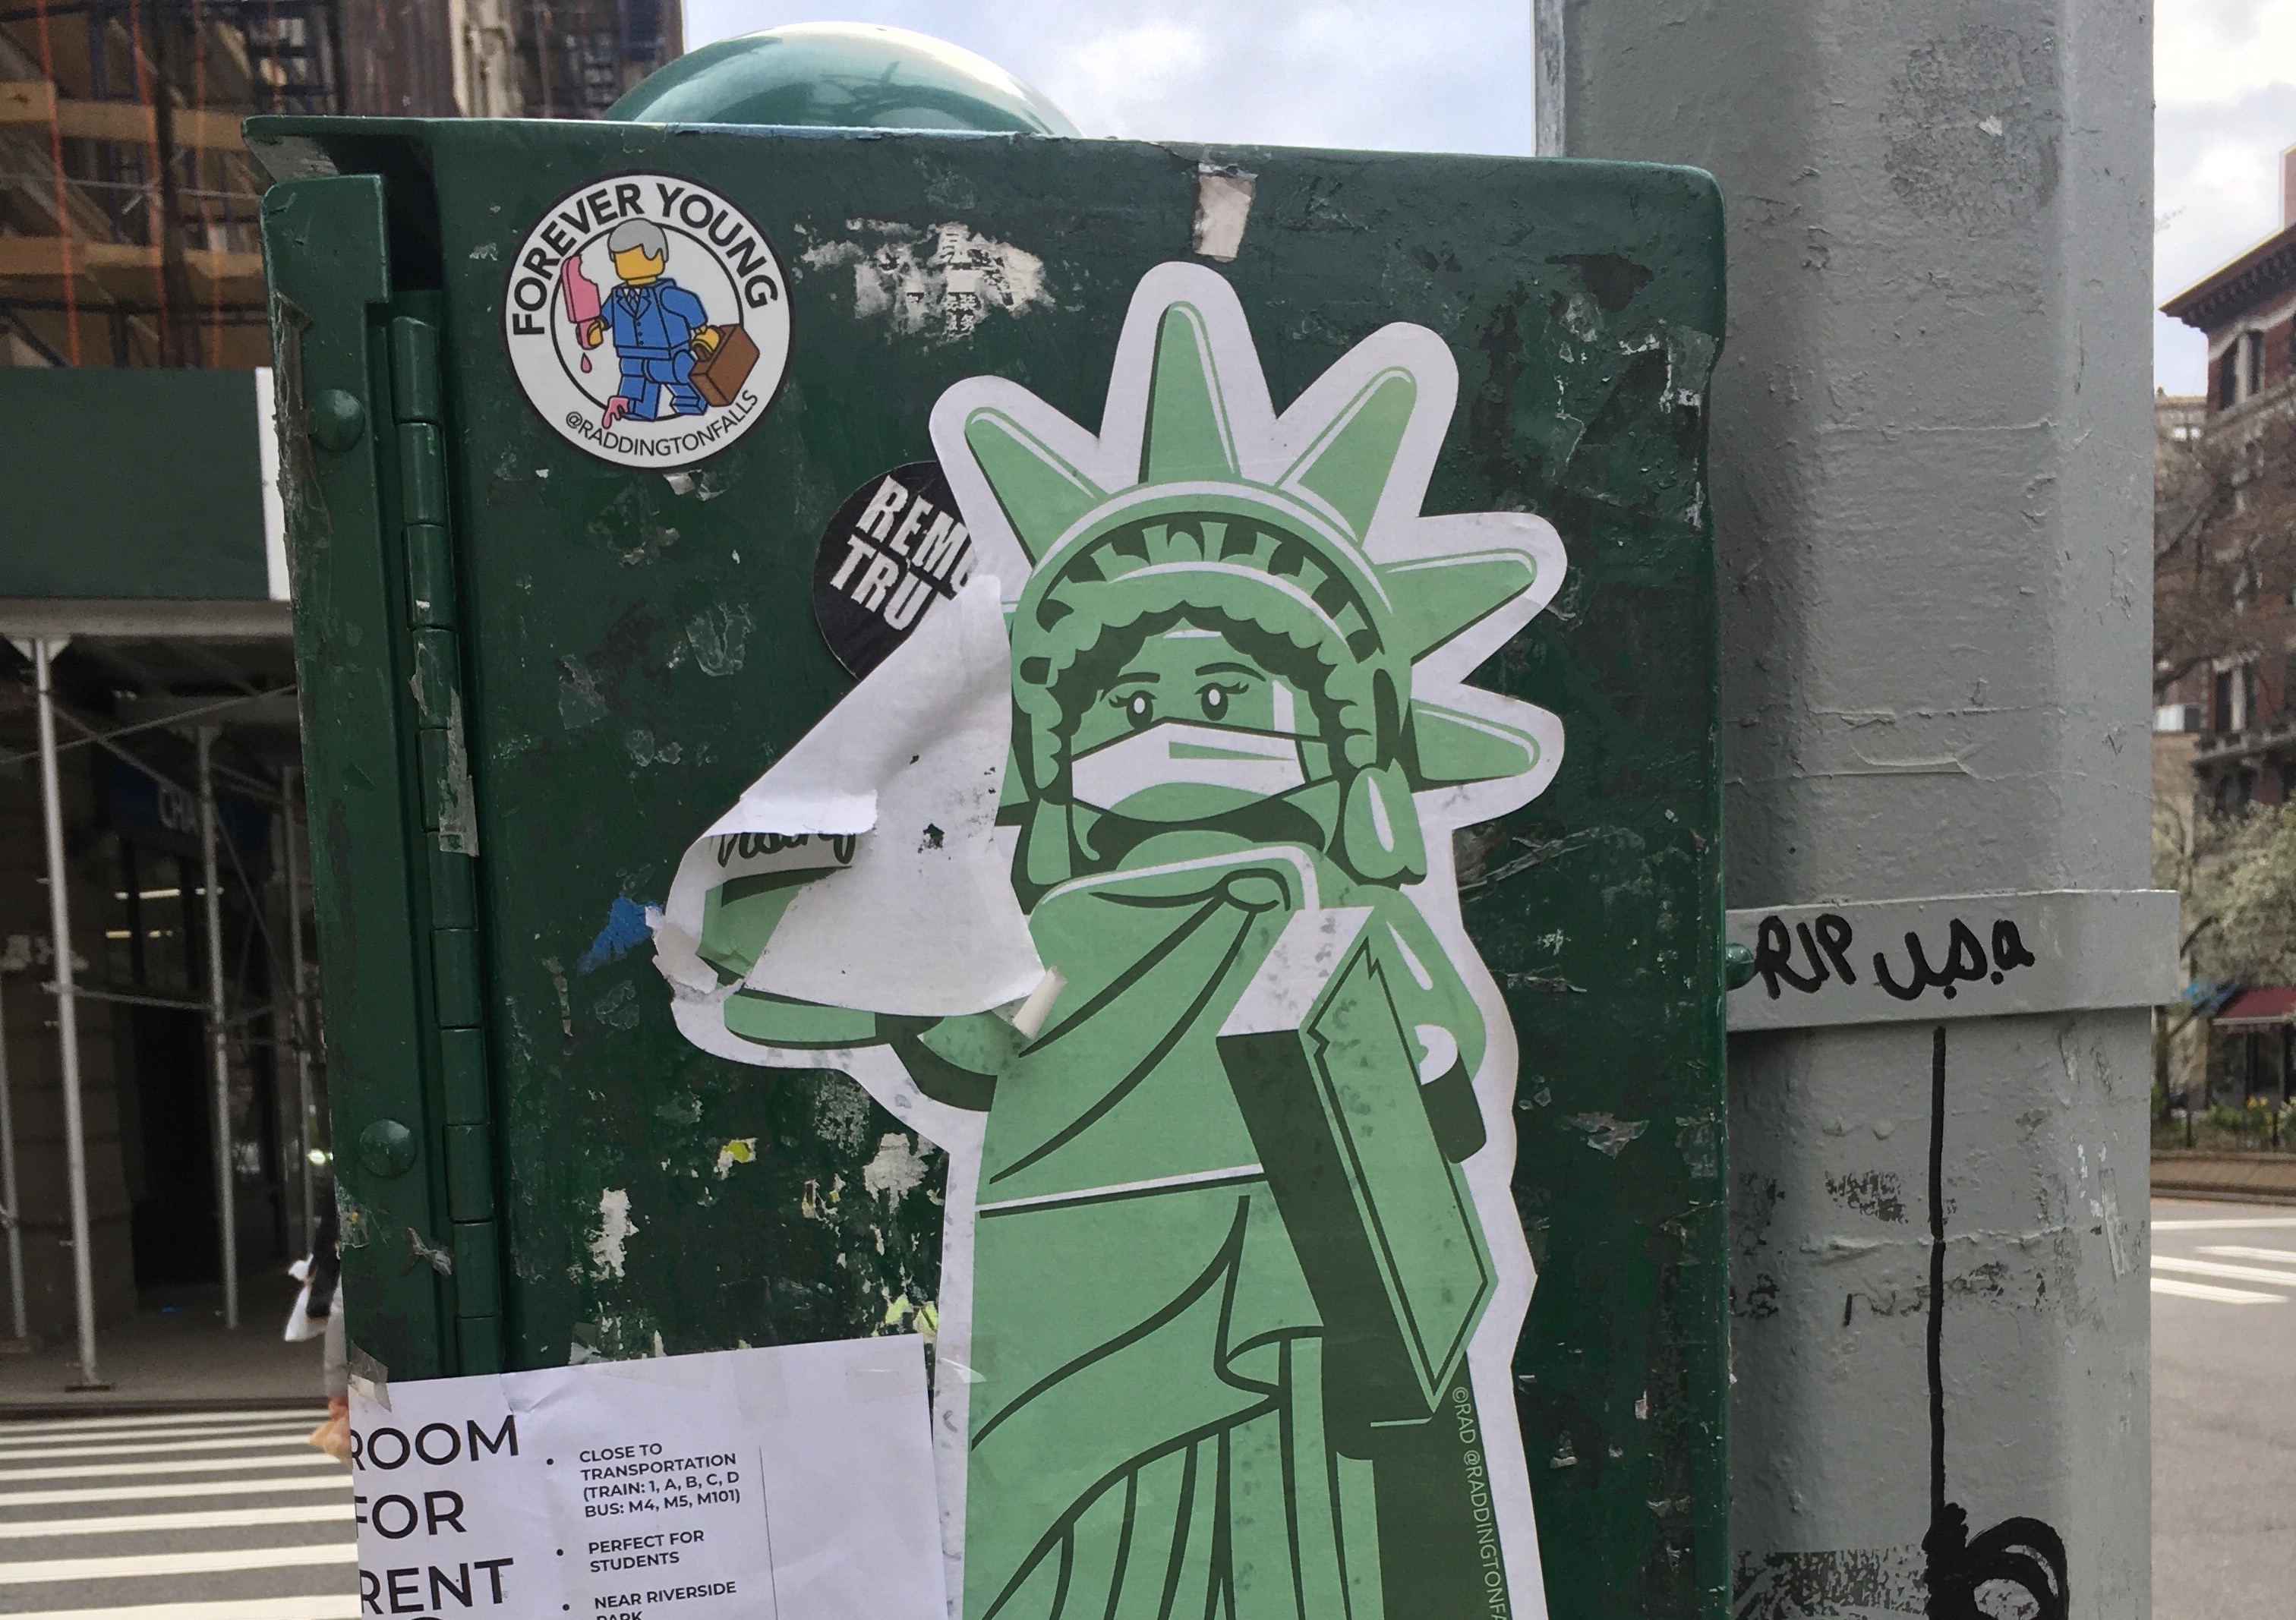 Photograph of several stickers on a utility pole, the most prominent of which depicts the Statue of Liberty wearing a surgical face-mask.